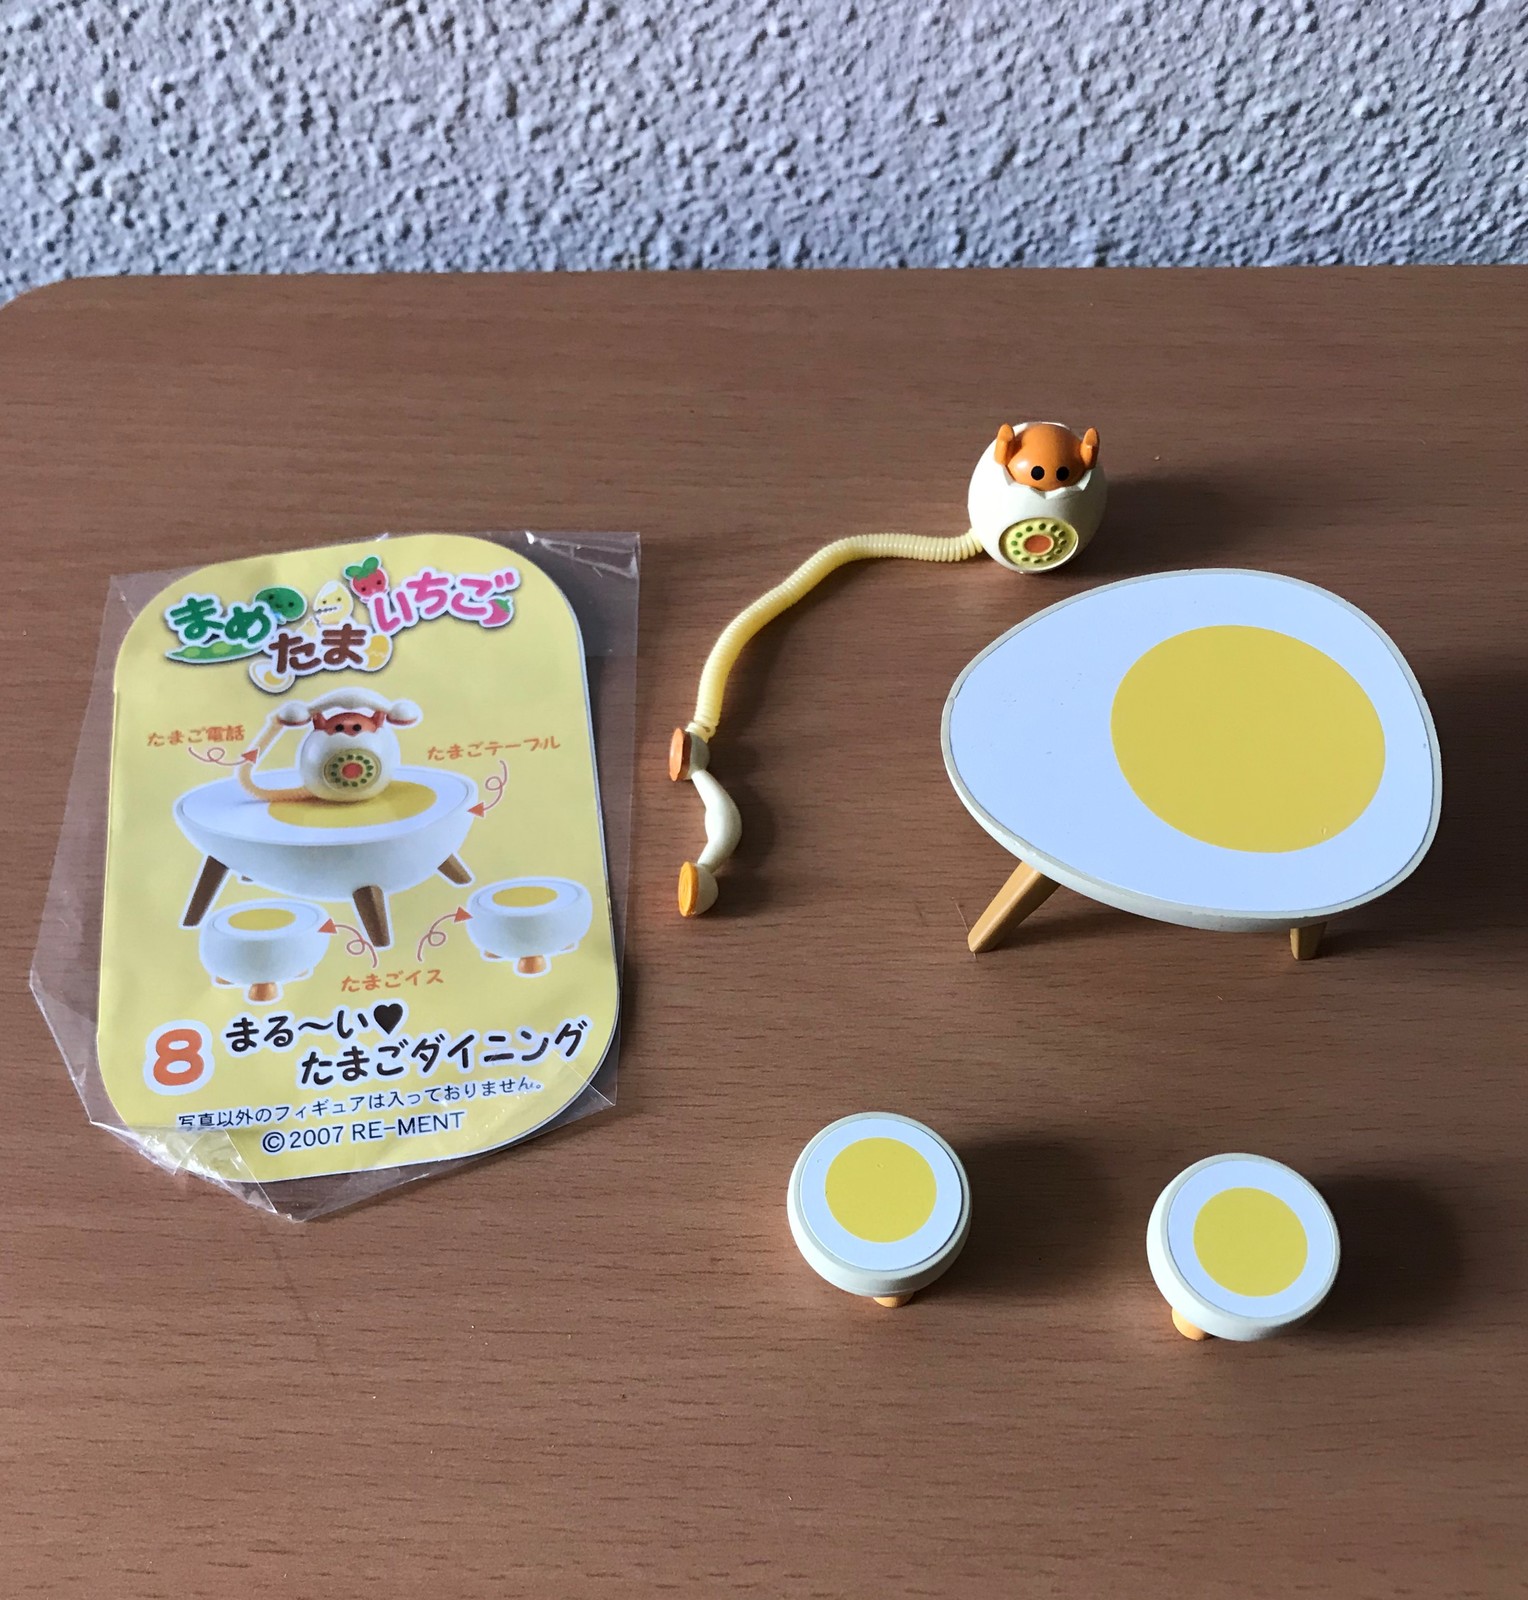 Primary image for Re-Ment Mame Tama Ichigo #8 Round Egg Dining Table Phone Miniature 2007 Rement